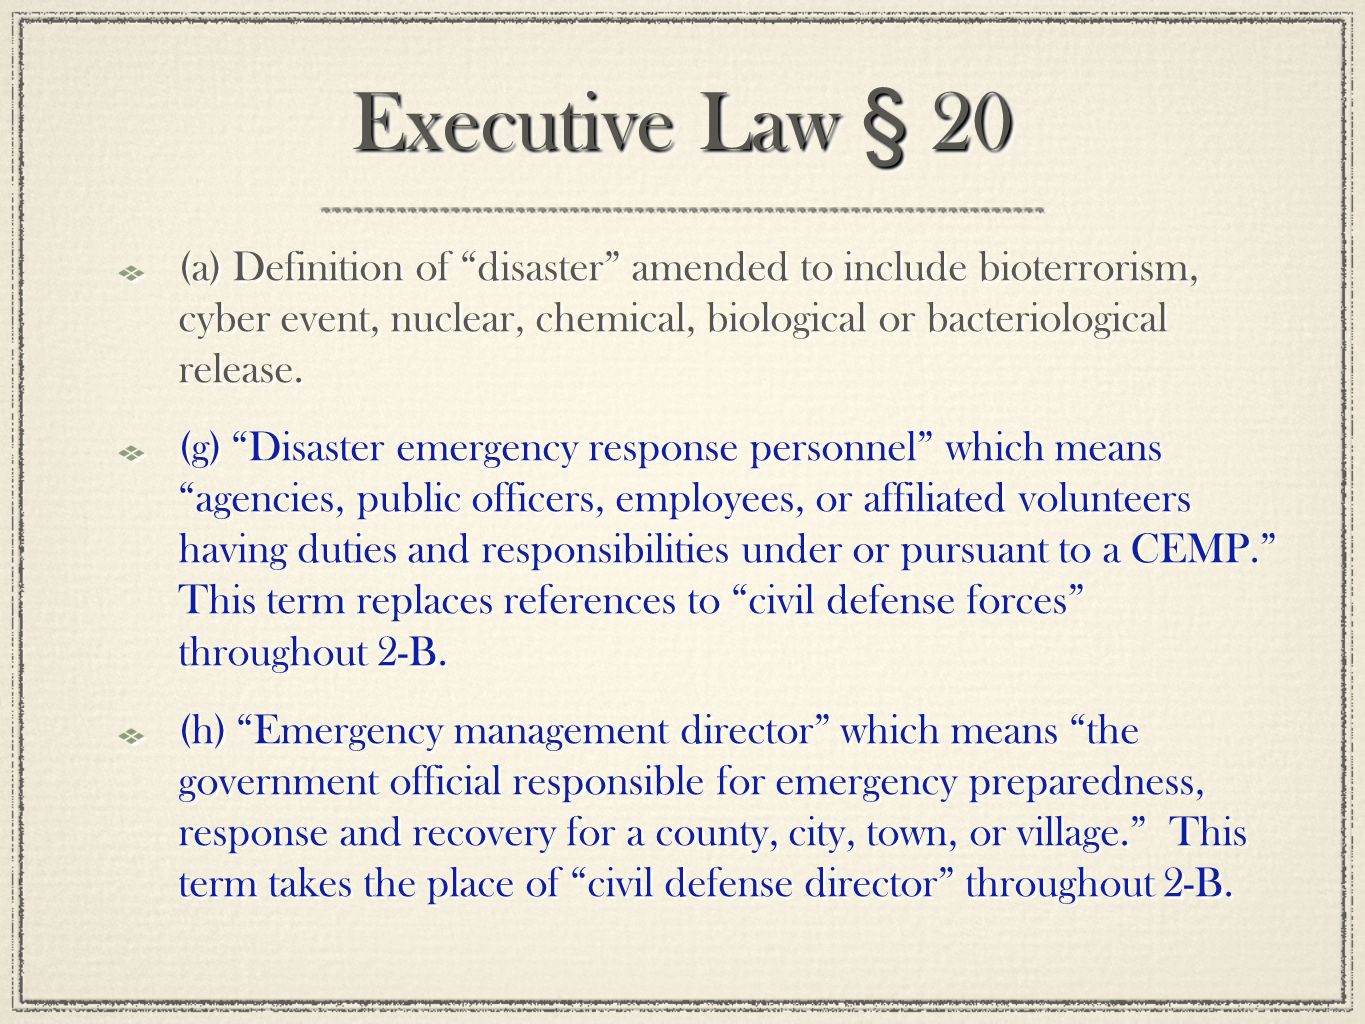 Executive Law § 20 (a) Definition of disaster amended to include bioterrorism, cyber event, nuclear, chemical, biological or bacteriological release.